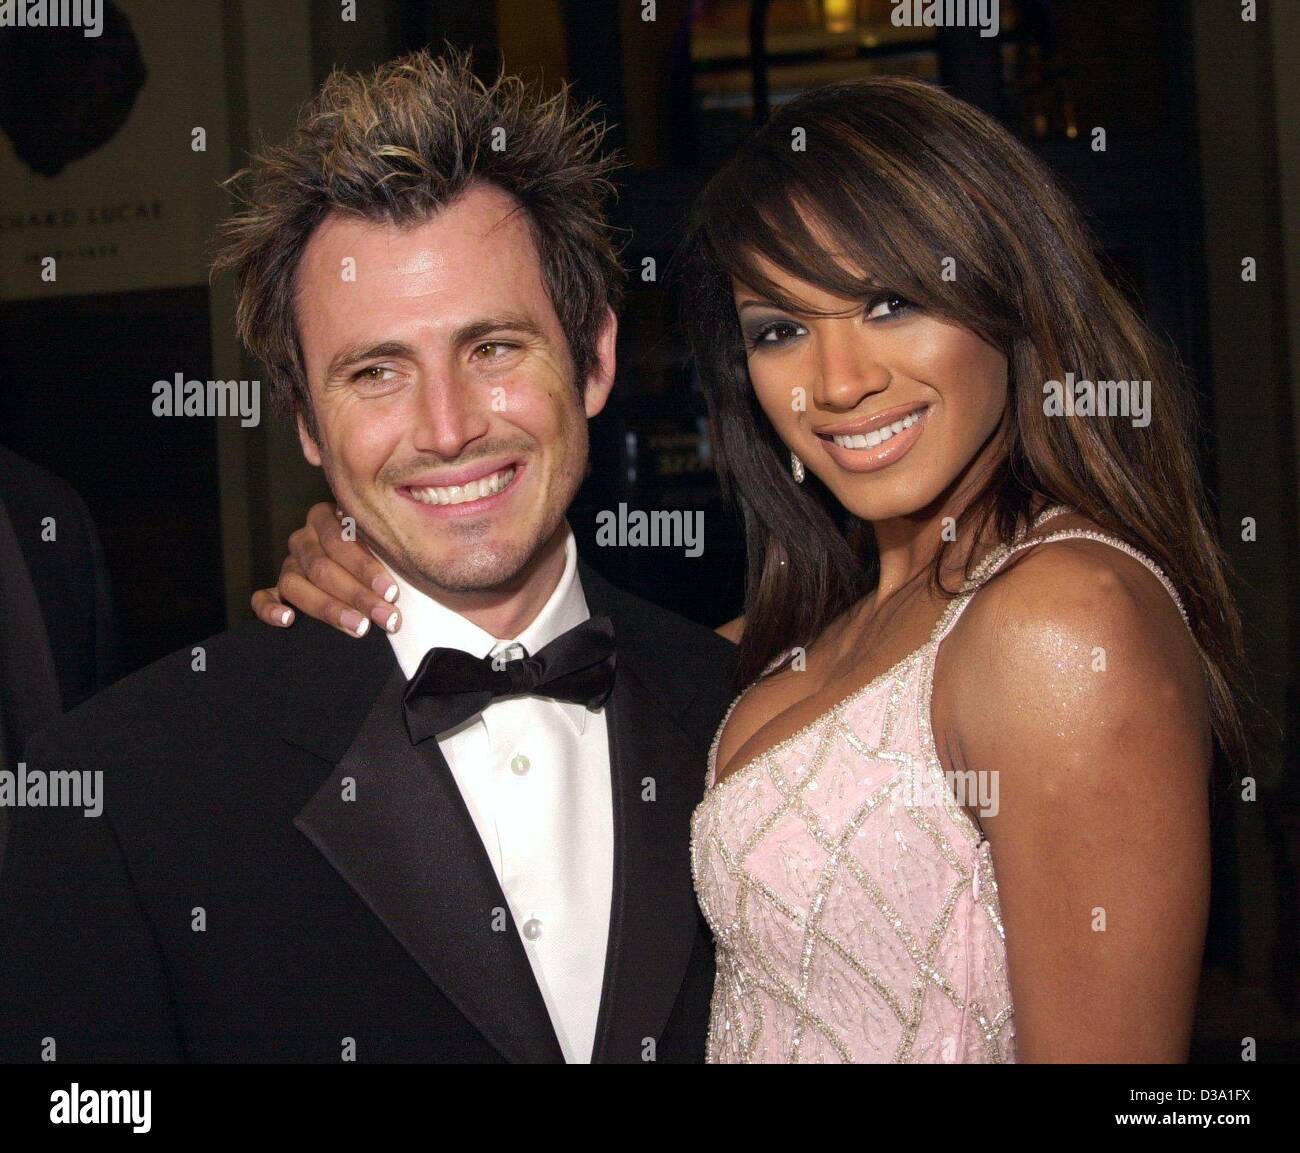 (dpa) - American actress Traci Bingham ('Baywatch') with her husband Rob Vialler were guests at the Opera Ball in Frankfurt, 23 February 2002. Stock Photo